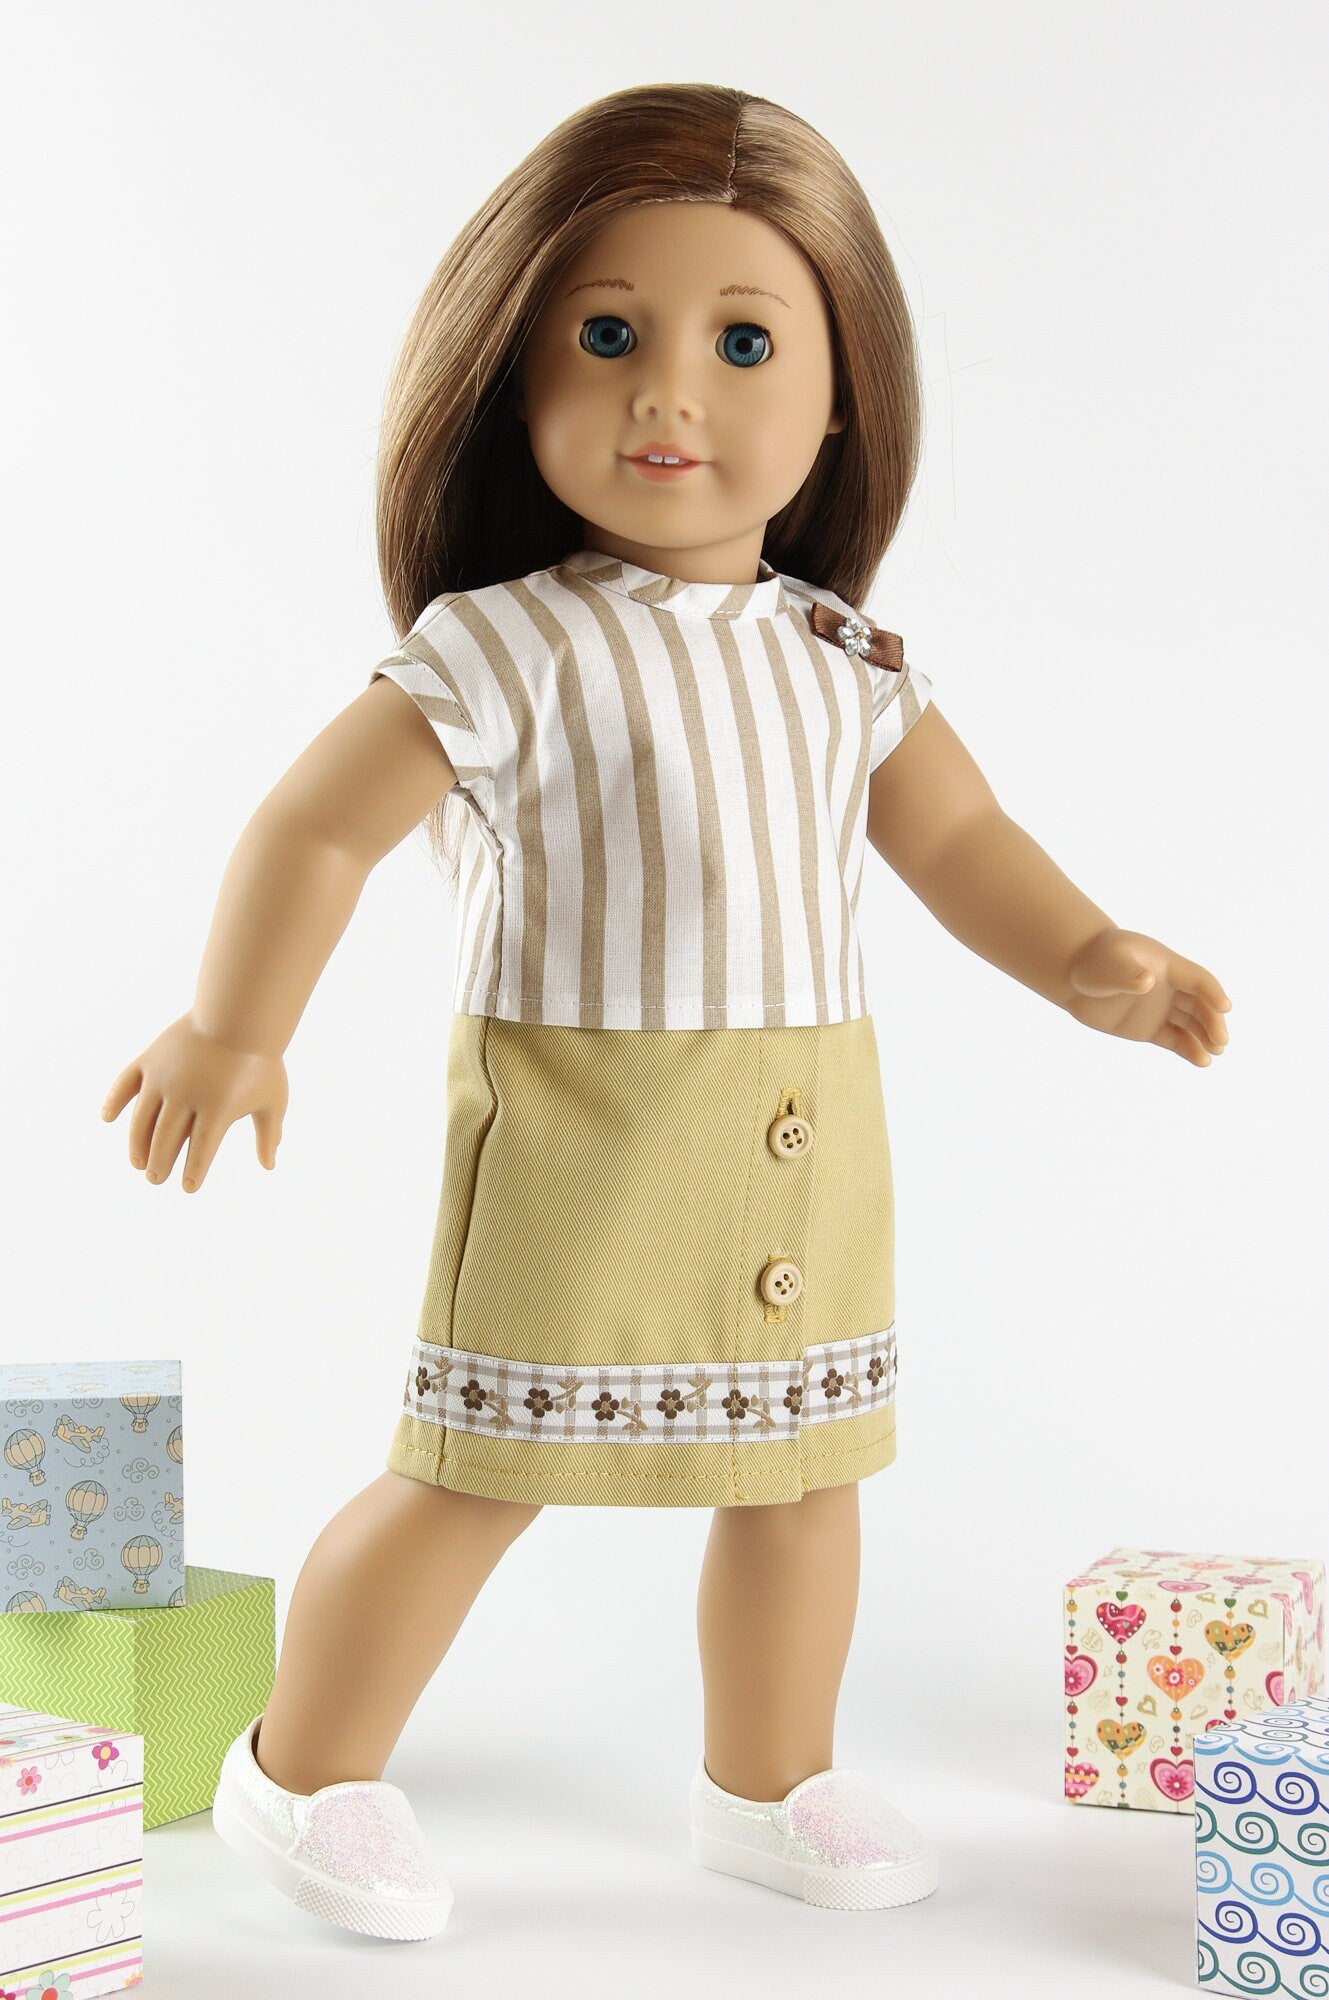 New 18 Inch American Girl Doll American Girl Doll Accessories